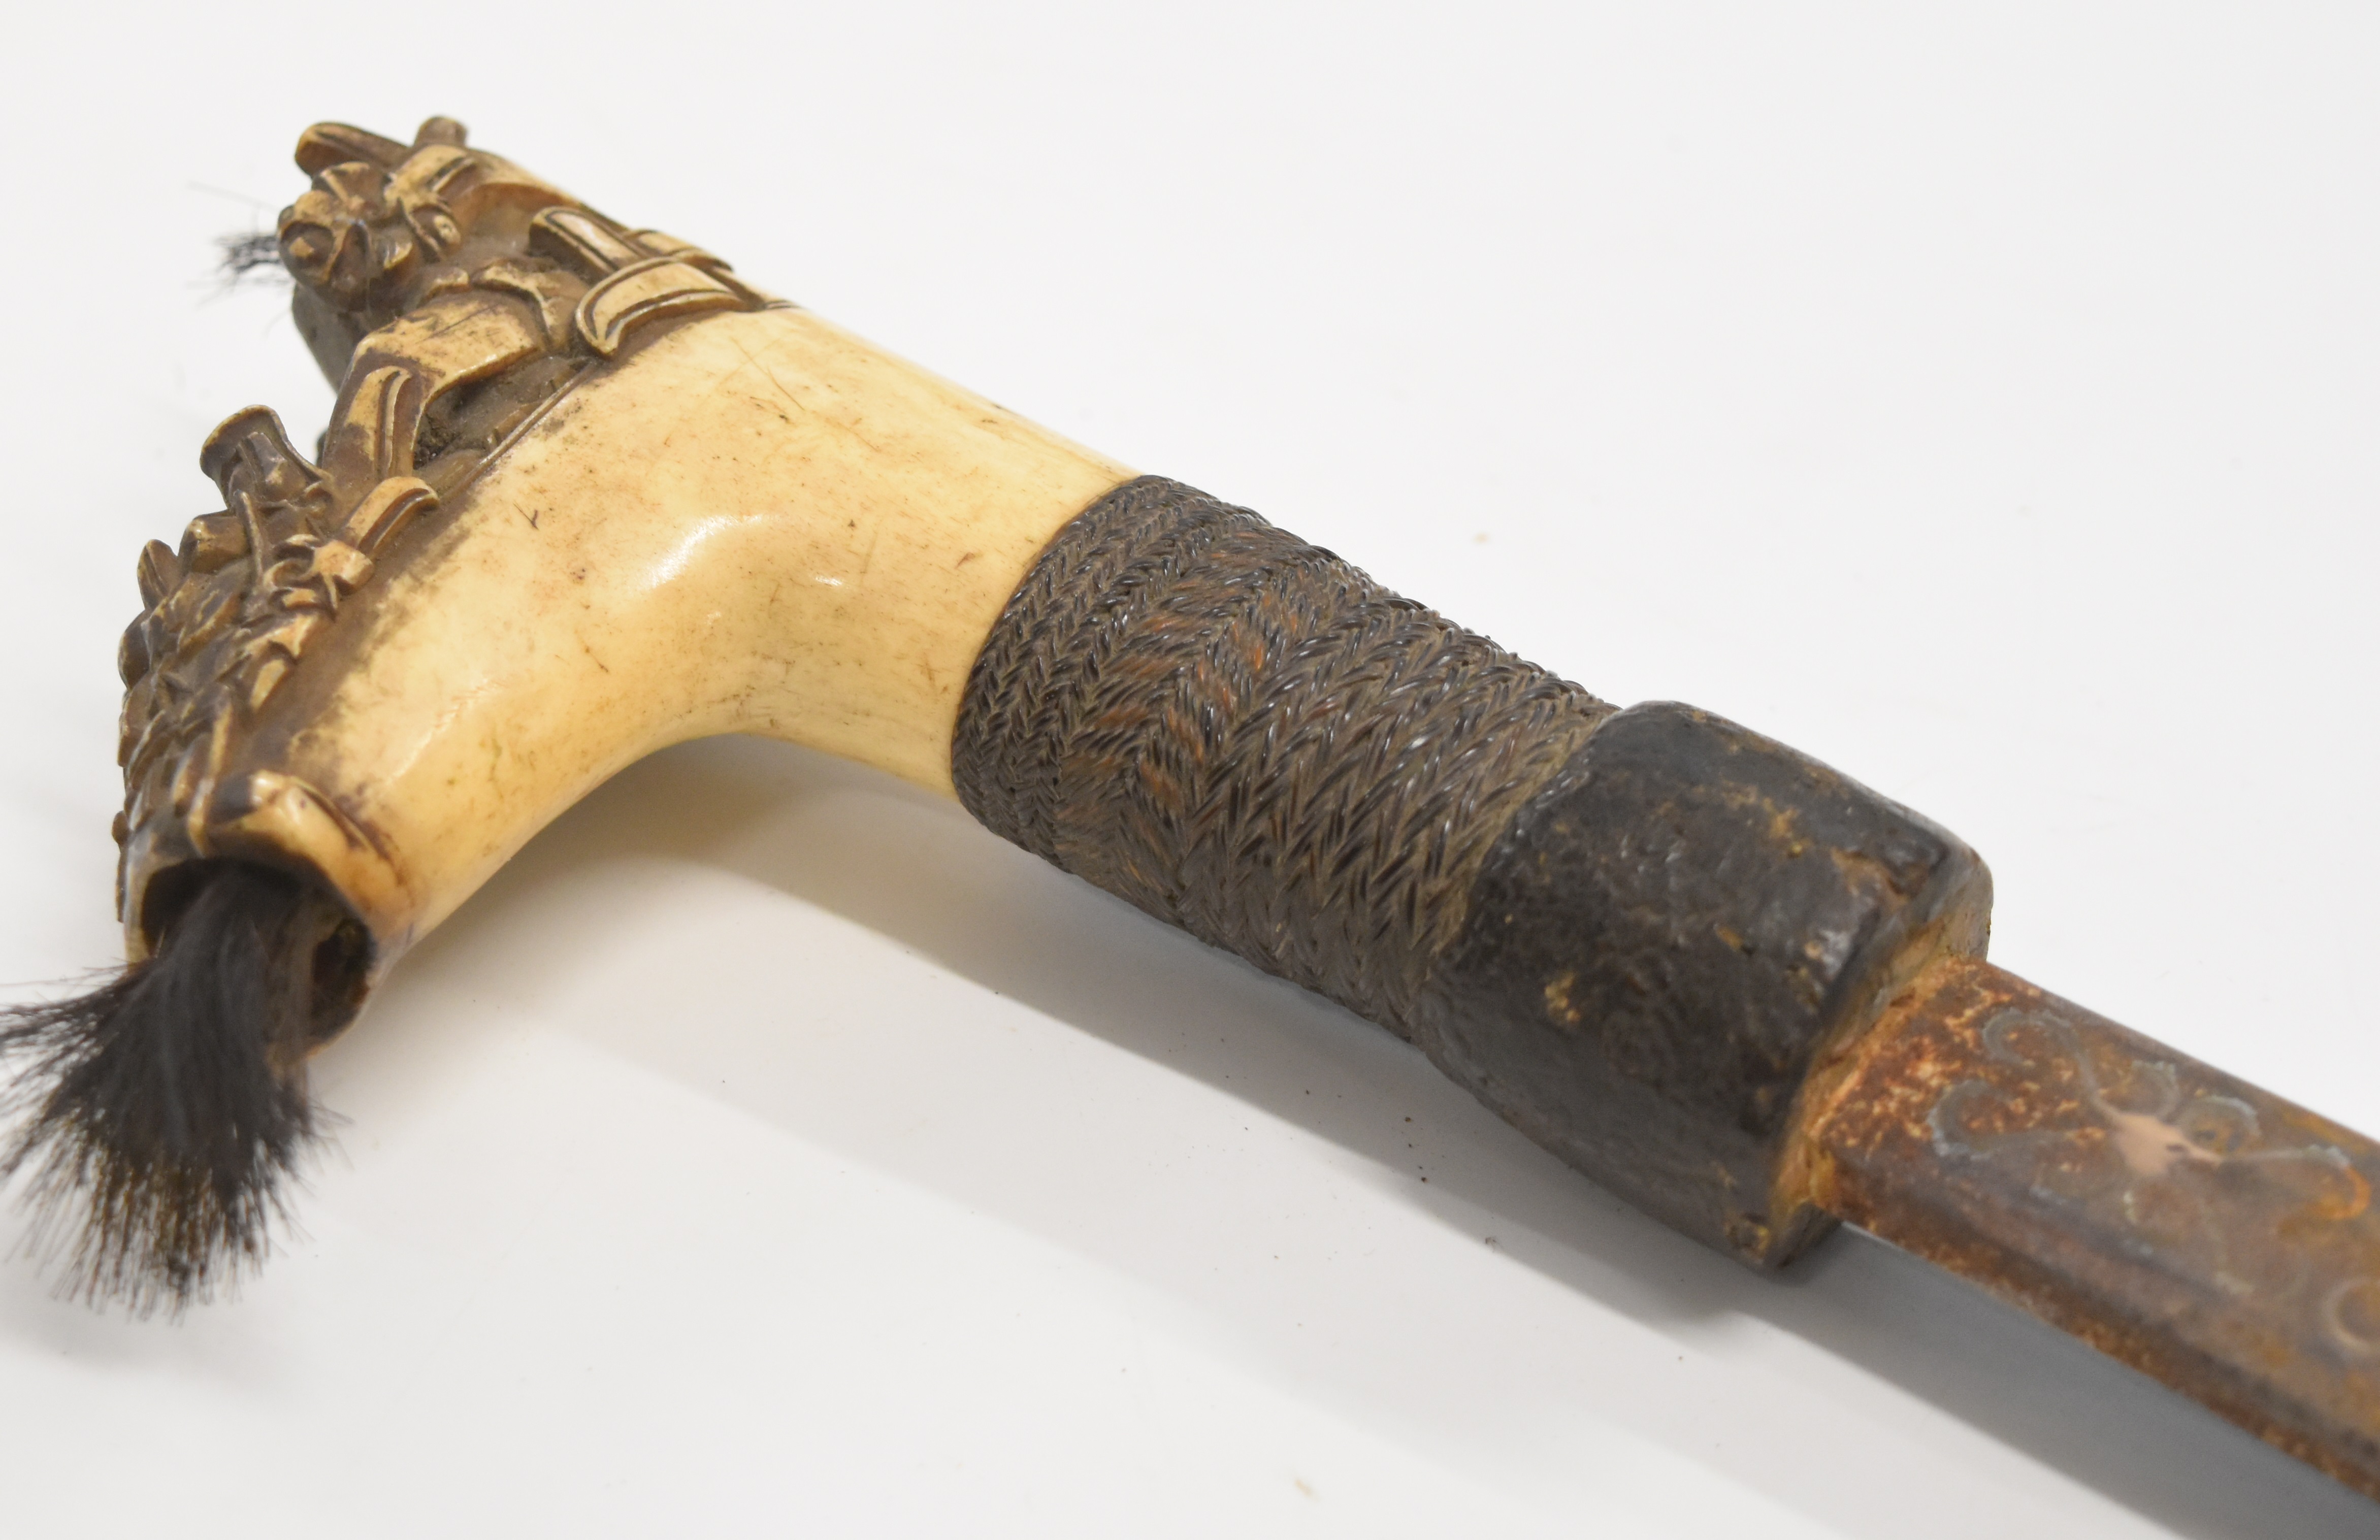 Borneo Dayak headhunter's sword with heavily carved bone hilt, hair plumes, coin inset grip, - Image 3 of 9